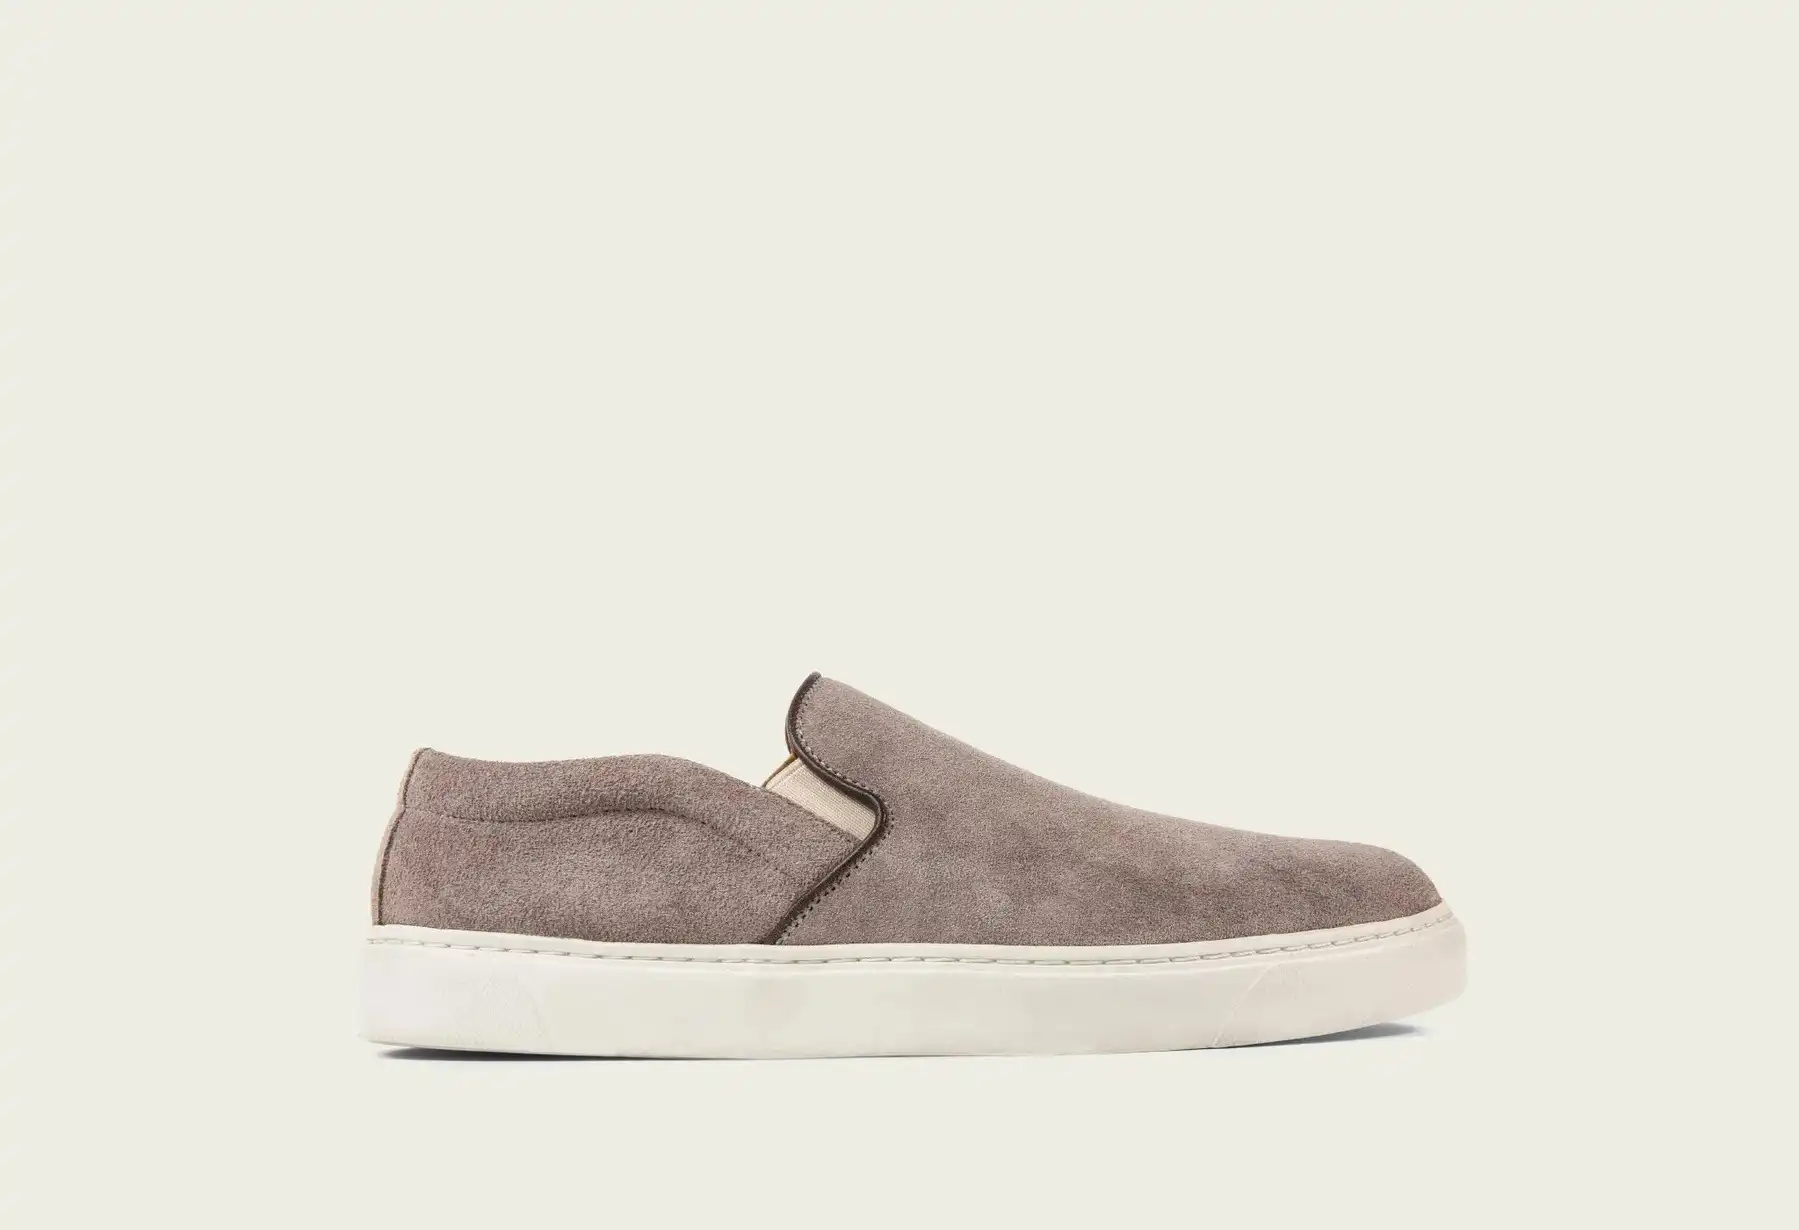 Viberg Slip-on in Eco Veg Pewter Suede Roughout